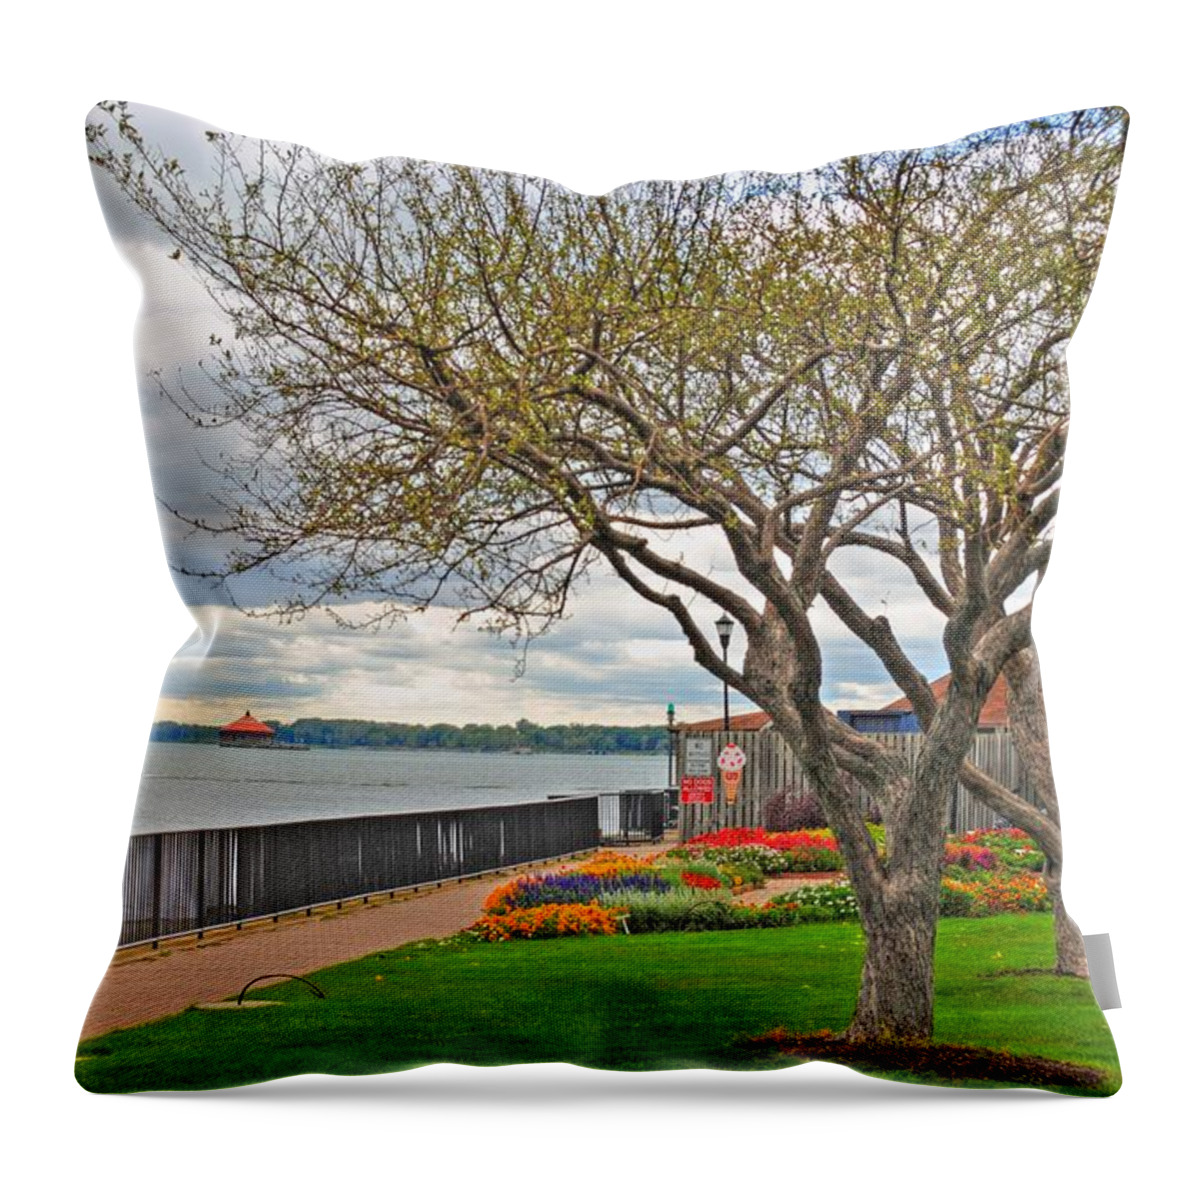  Throw Pillow featuring the photograph A View From the Garden by Michael Frank Jr